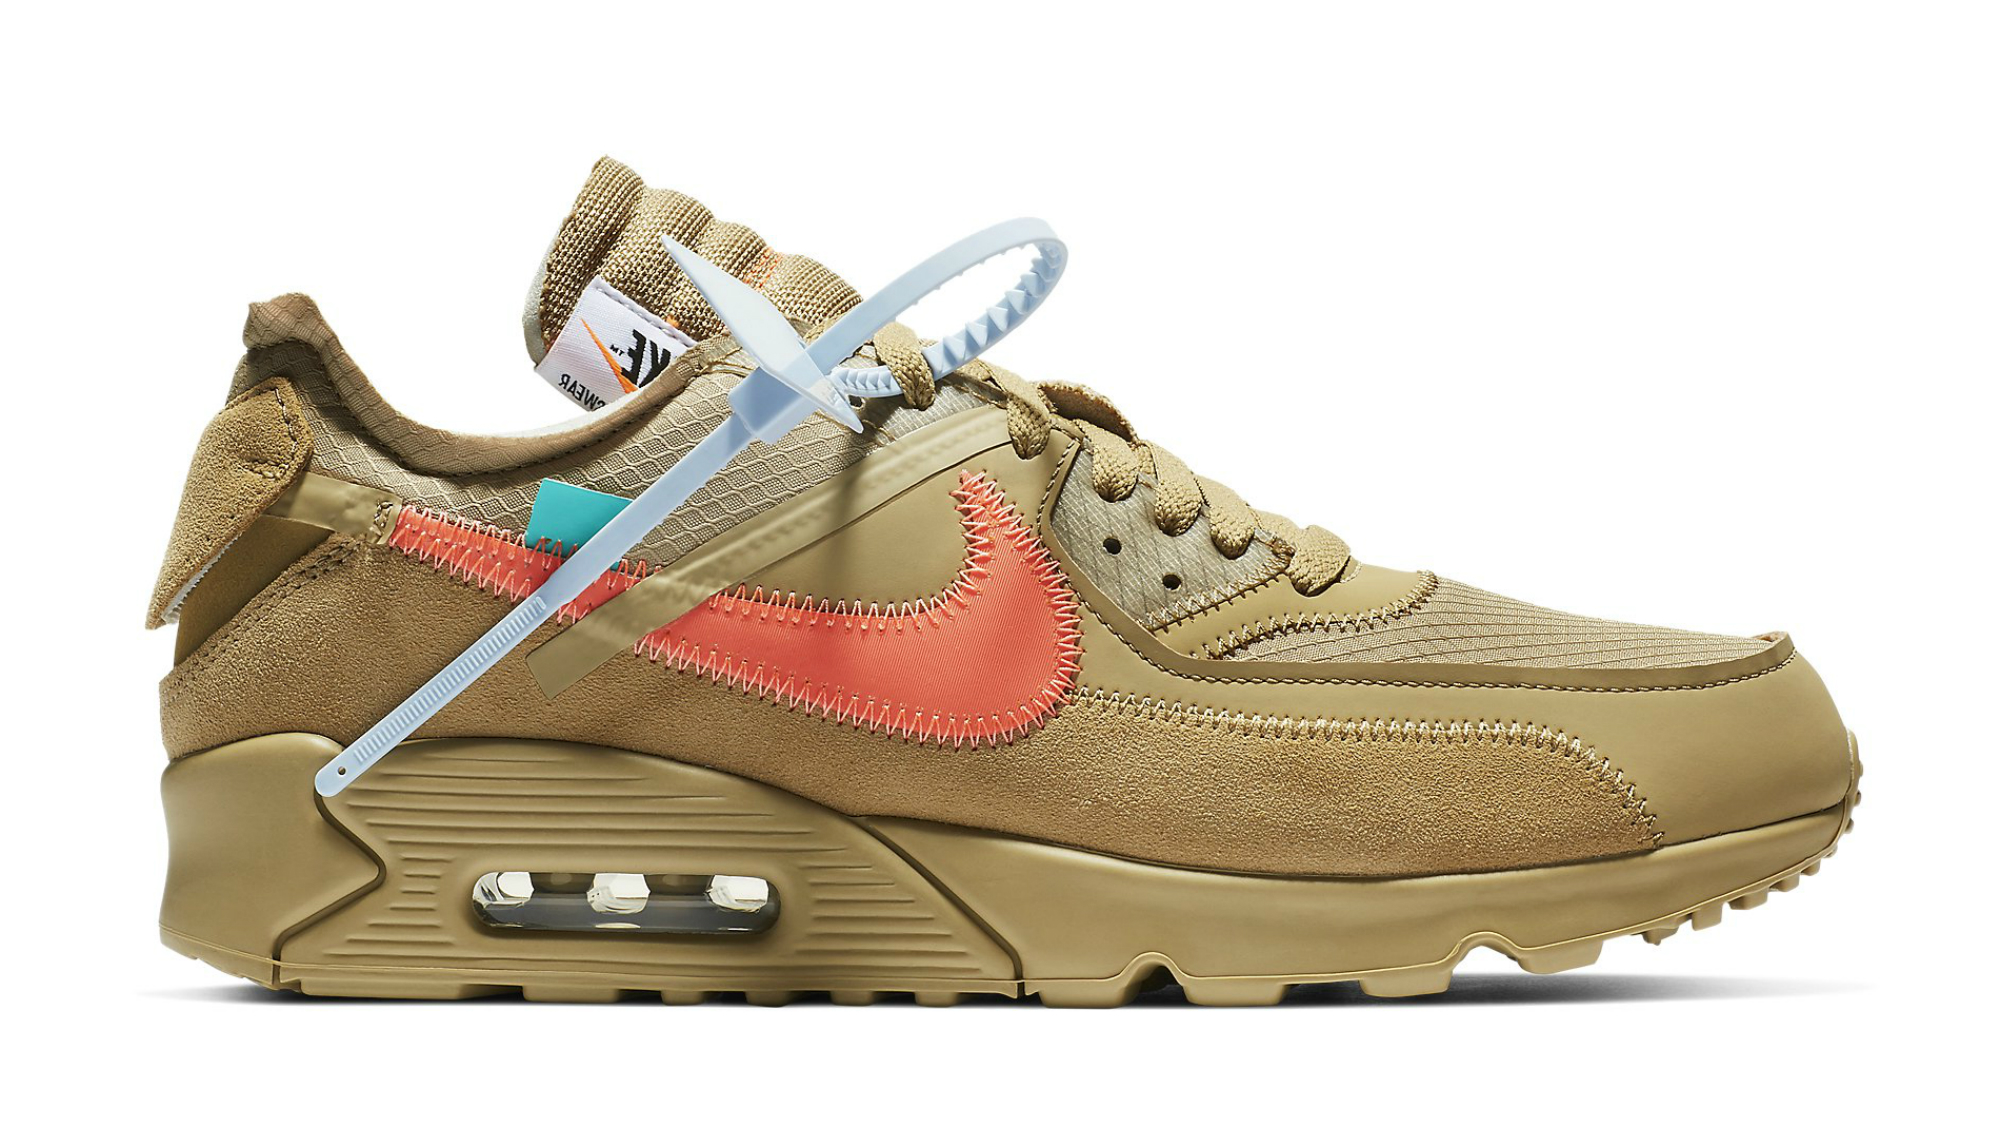 off white nike air max 90 desert ore aa7293 200 release date